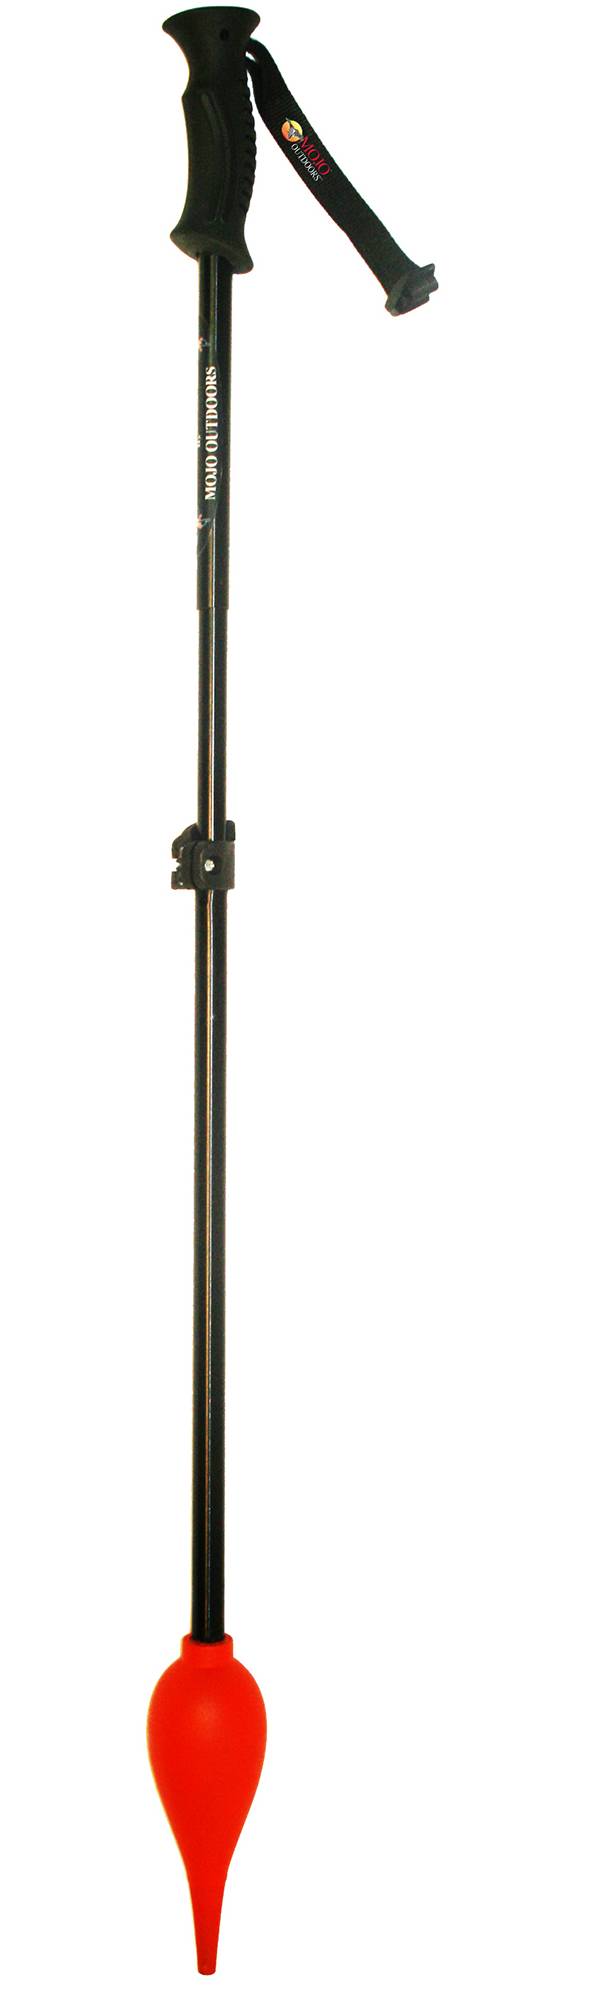 MOJO Outdoors THE KNOT Wading Pole product image